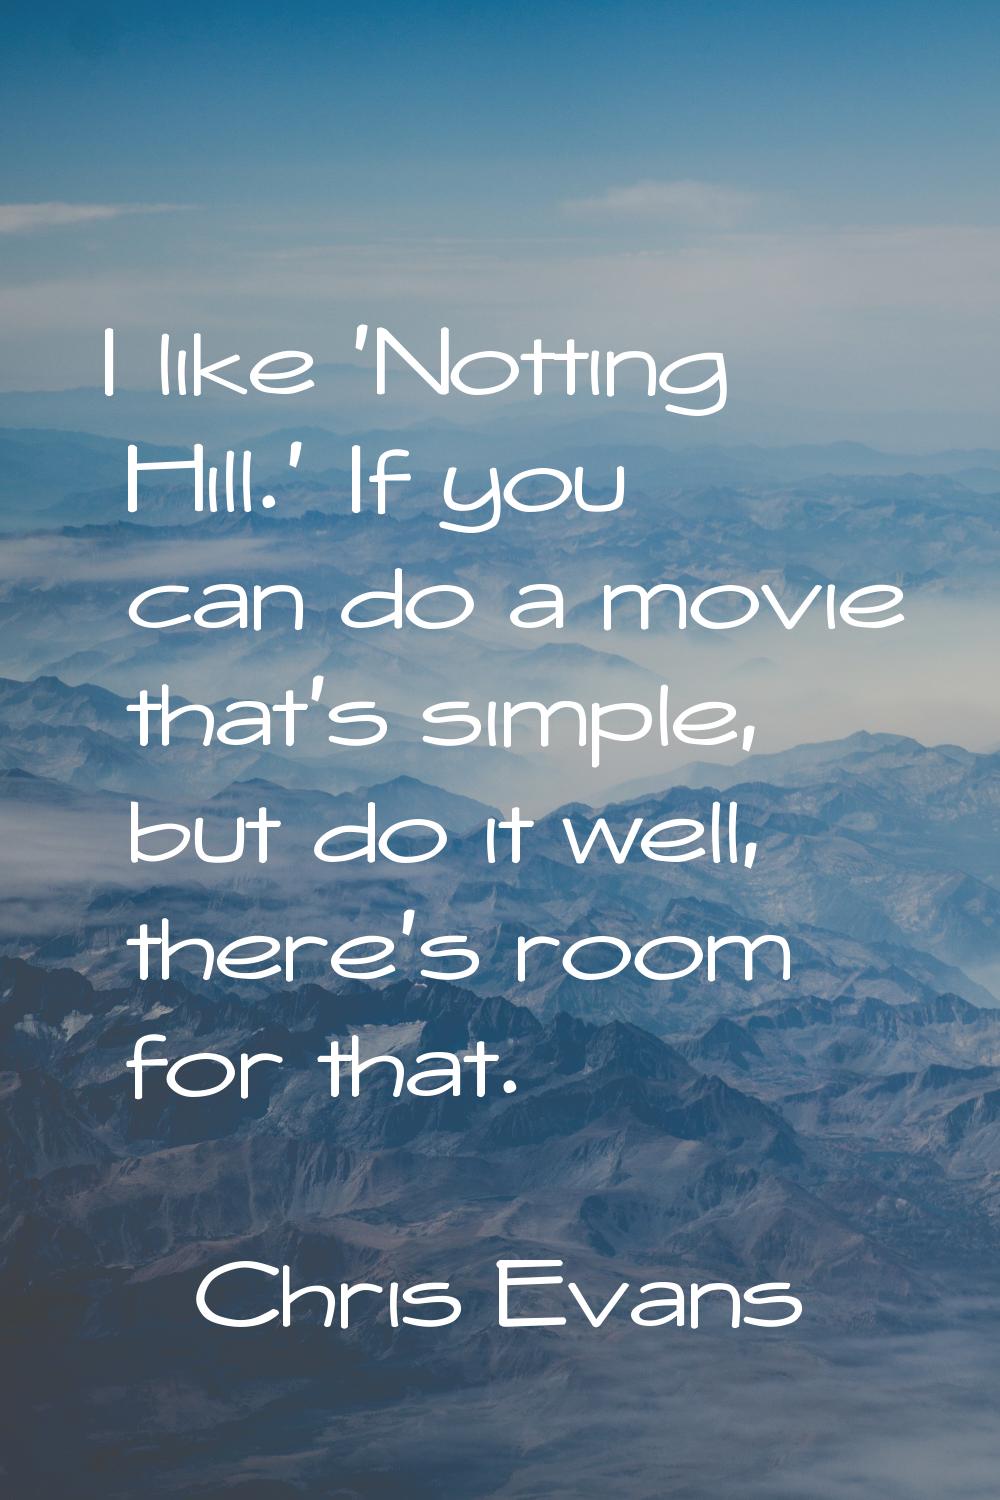 I like 'Notting Hill.' If you can do a movie that's simple, but do it well, there's room for that.